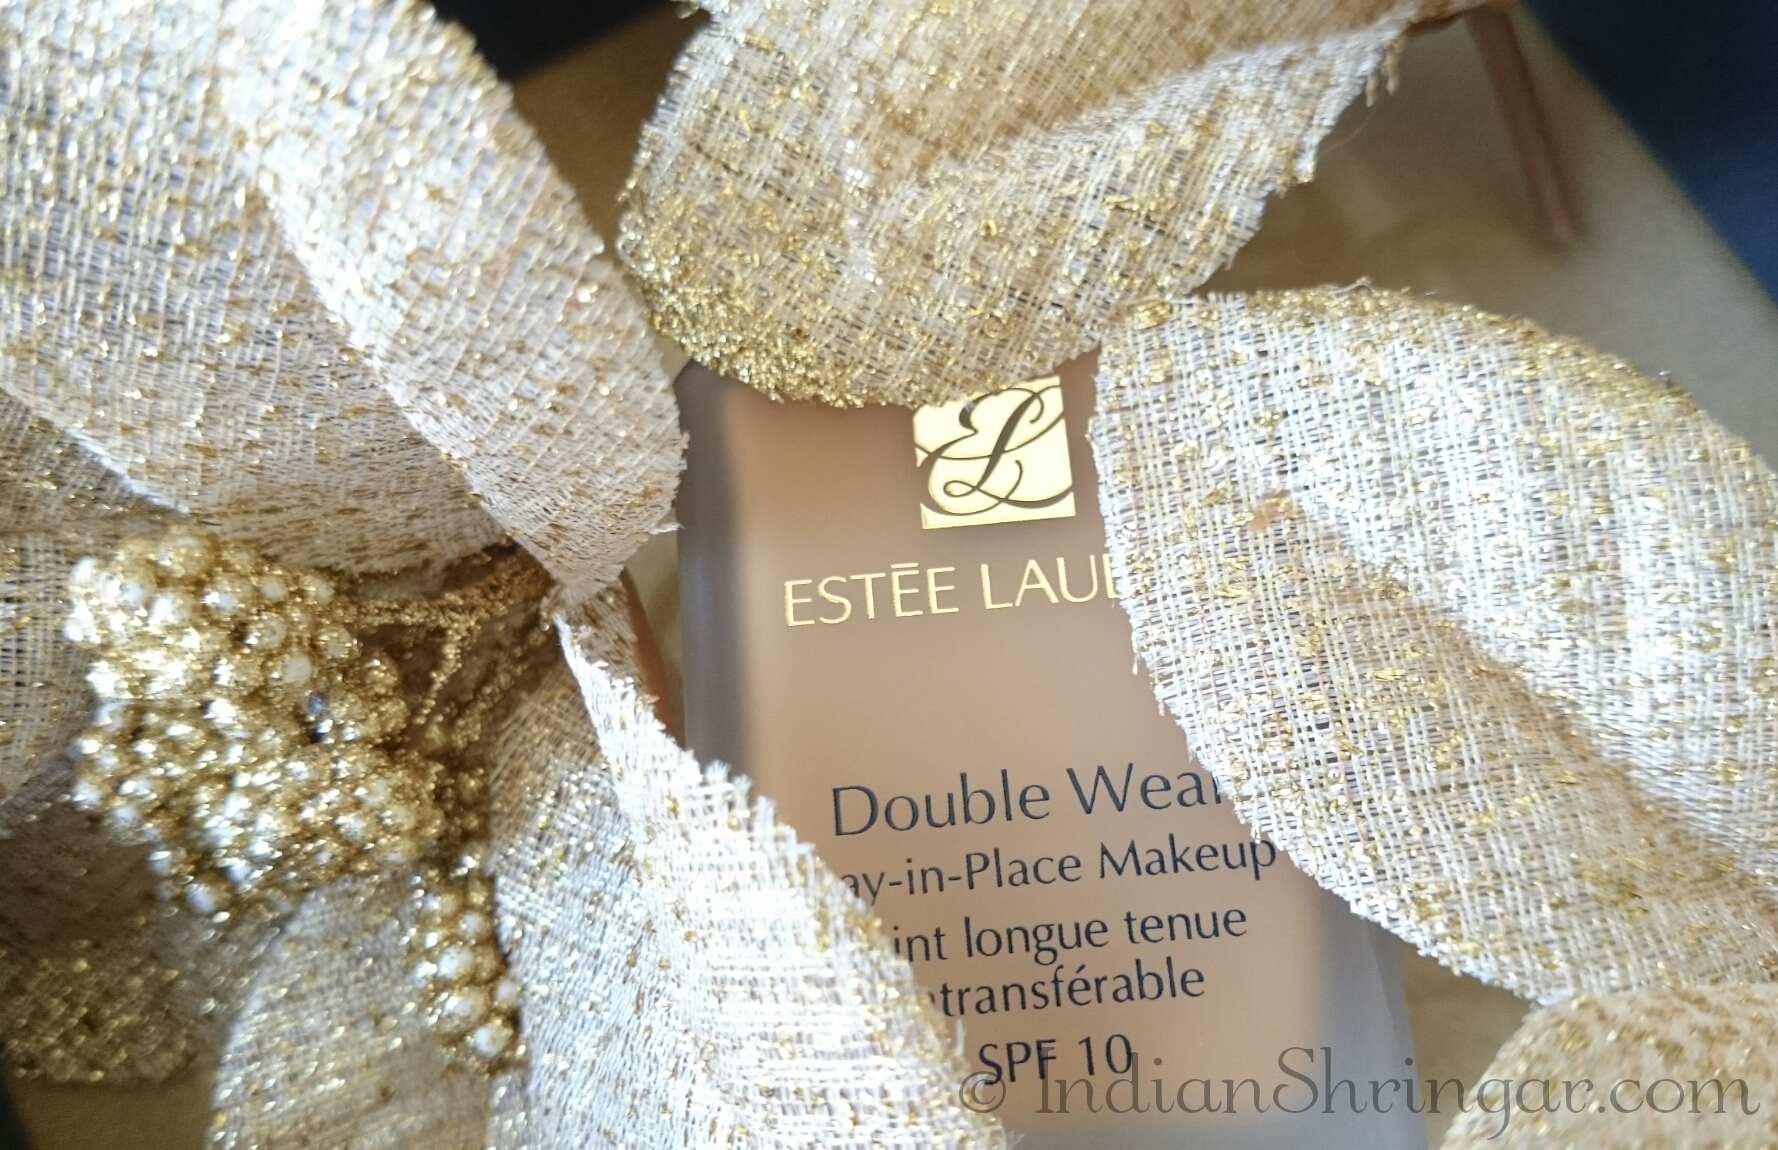 Estee Lauder Double Wear foundation review, swatch and price in India